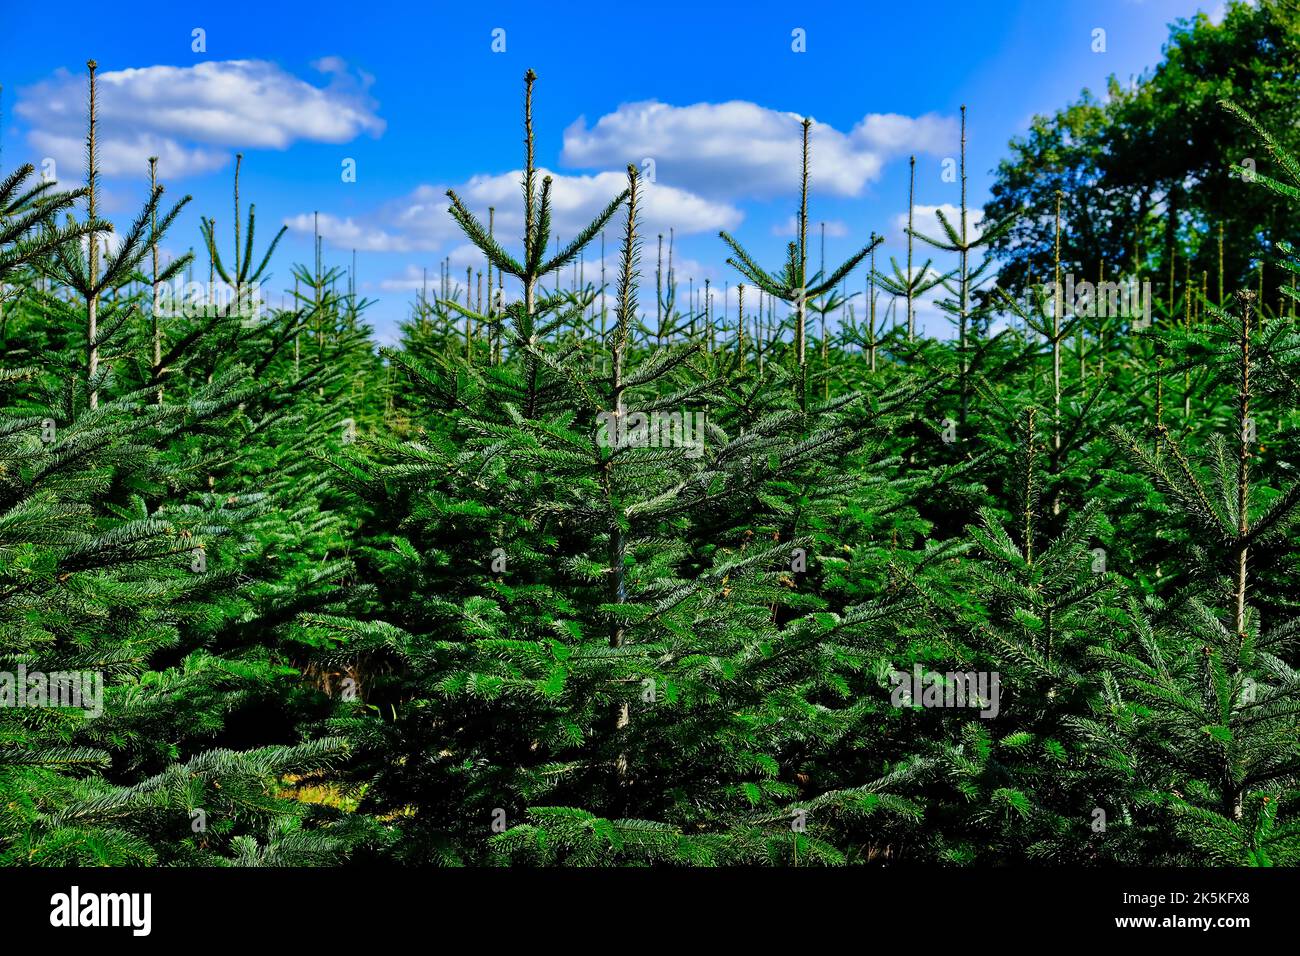 Plantation with Christmas trees (picea abies, Norway spruce), in the Morvan, Burgundy, France. Stock Photo